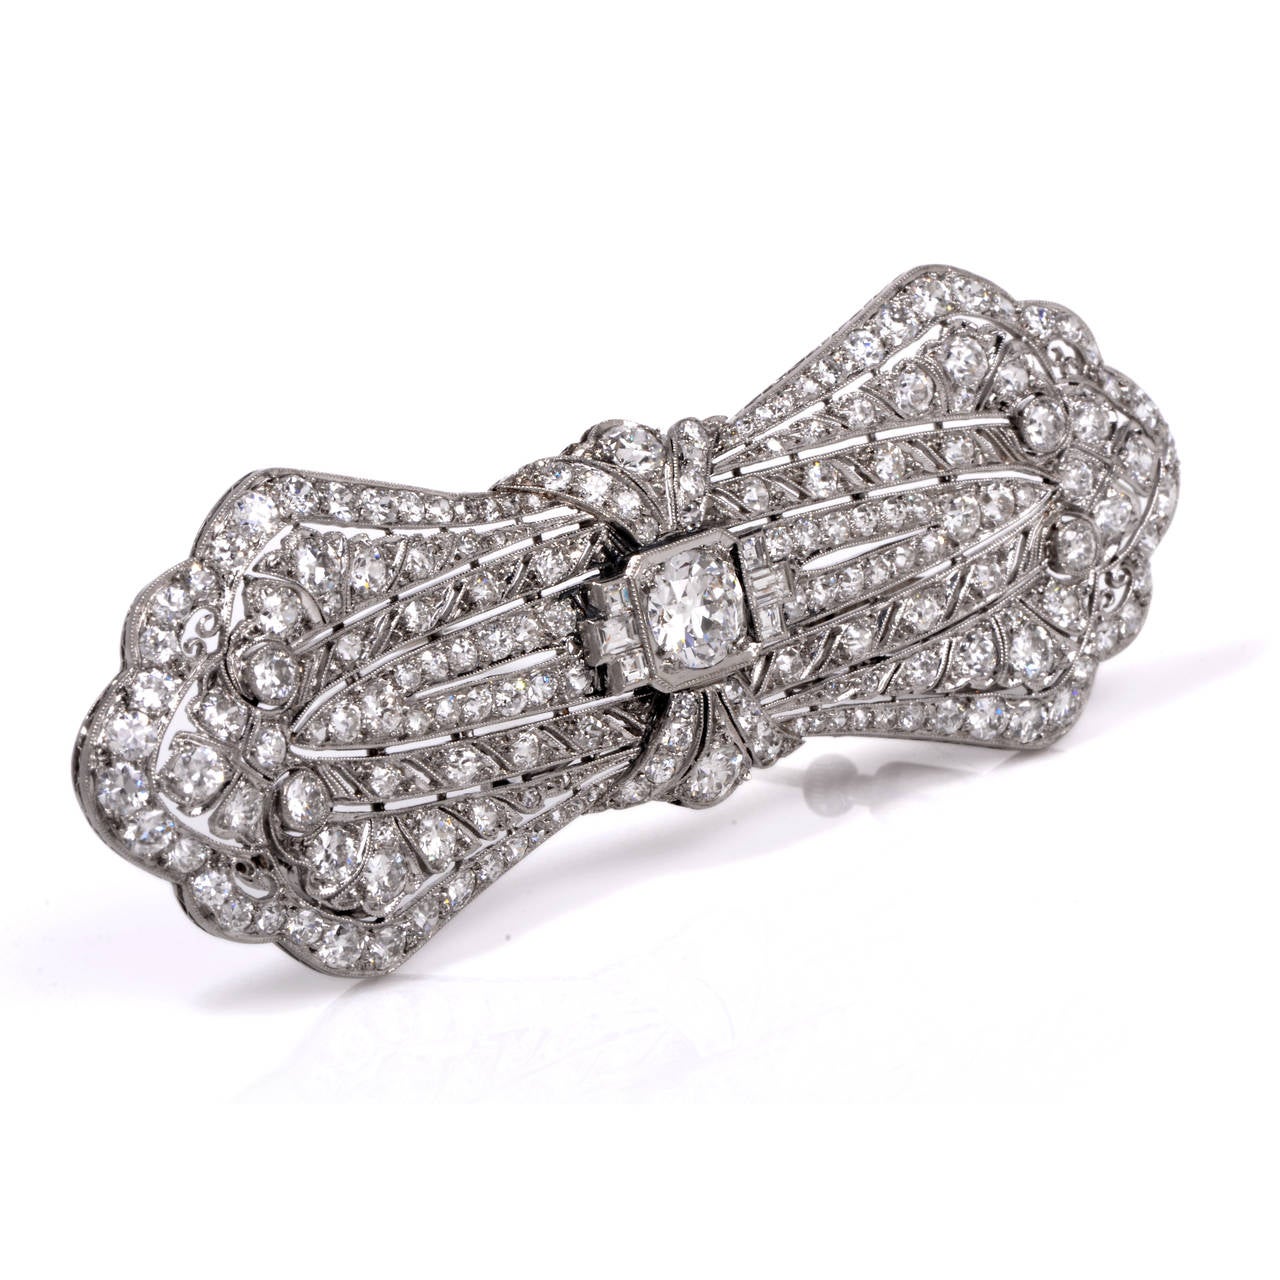 This exquisite Antique diamond pin has a stunning presence that is simply breath-taking. Finely crafted in solid platinum, it is centered with 1 genuine round cut diamond that is surrounded by a magnificent display of diamonds. Its center is holding